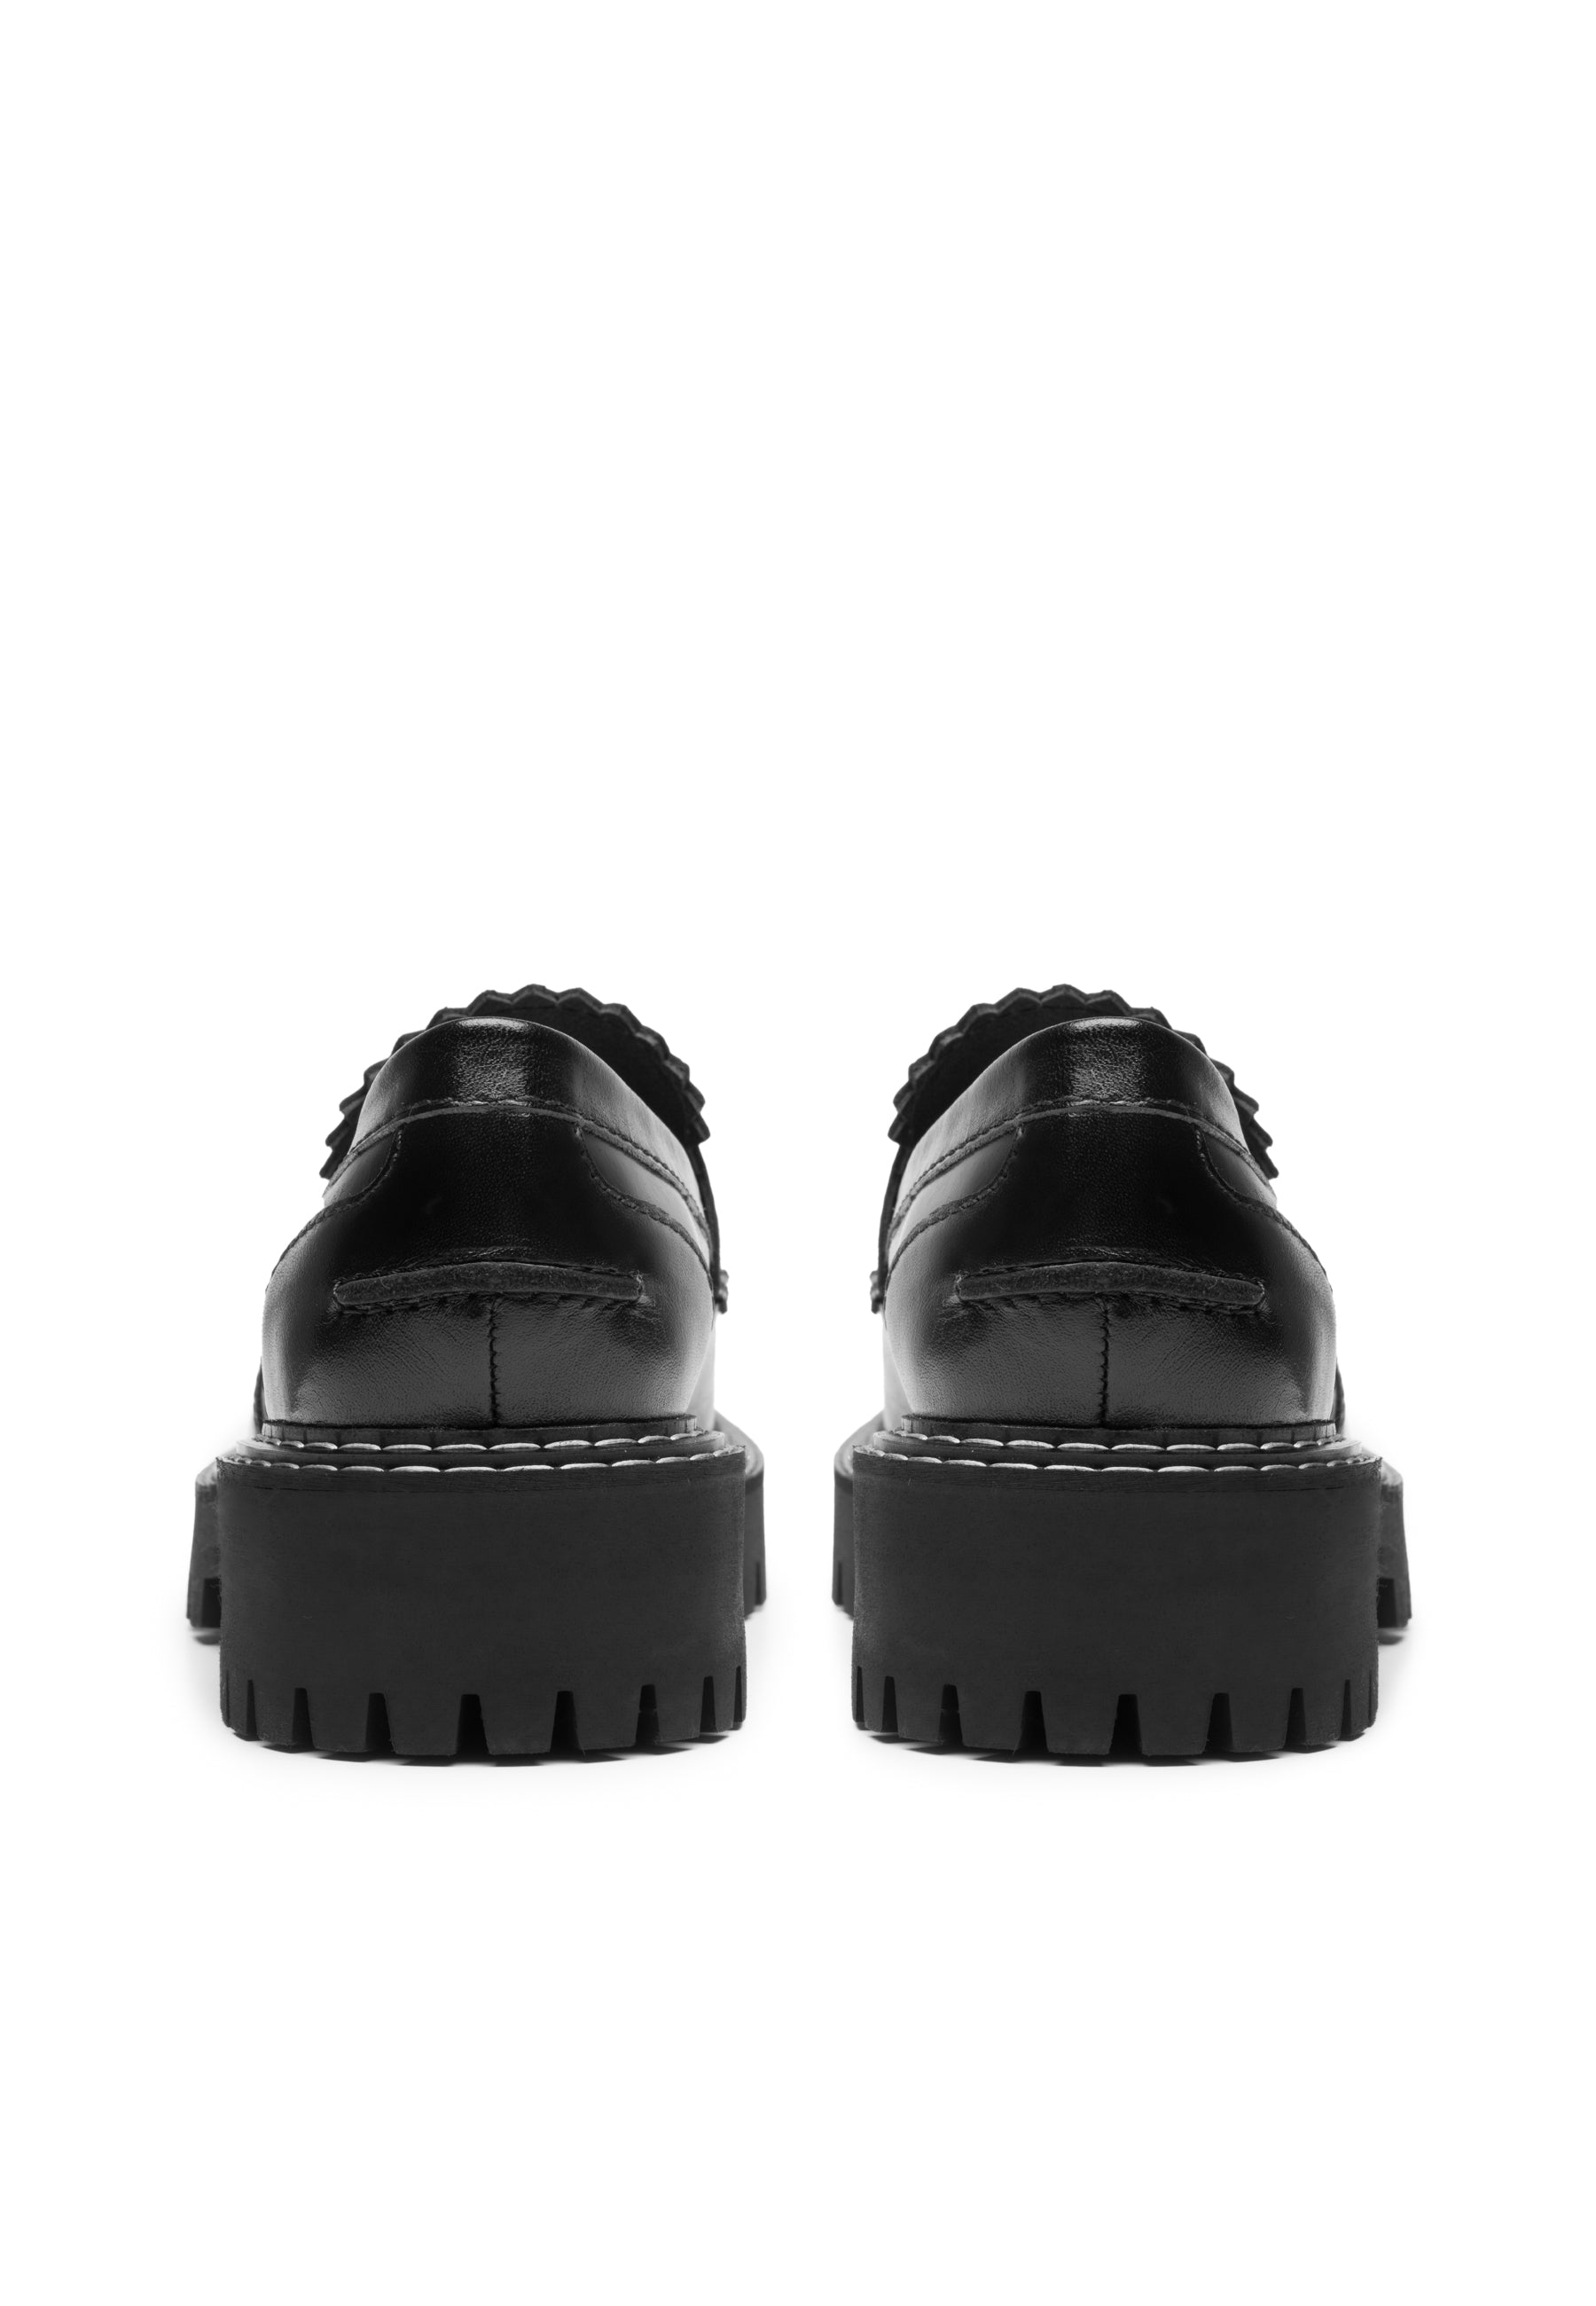 Matter Black Leather Loafers LAST1679 - 6